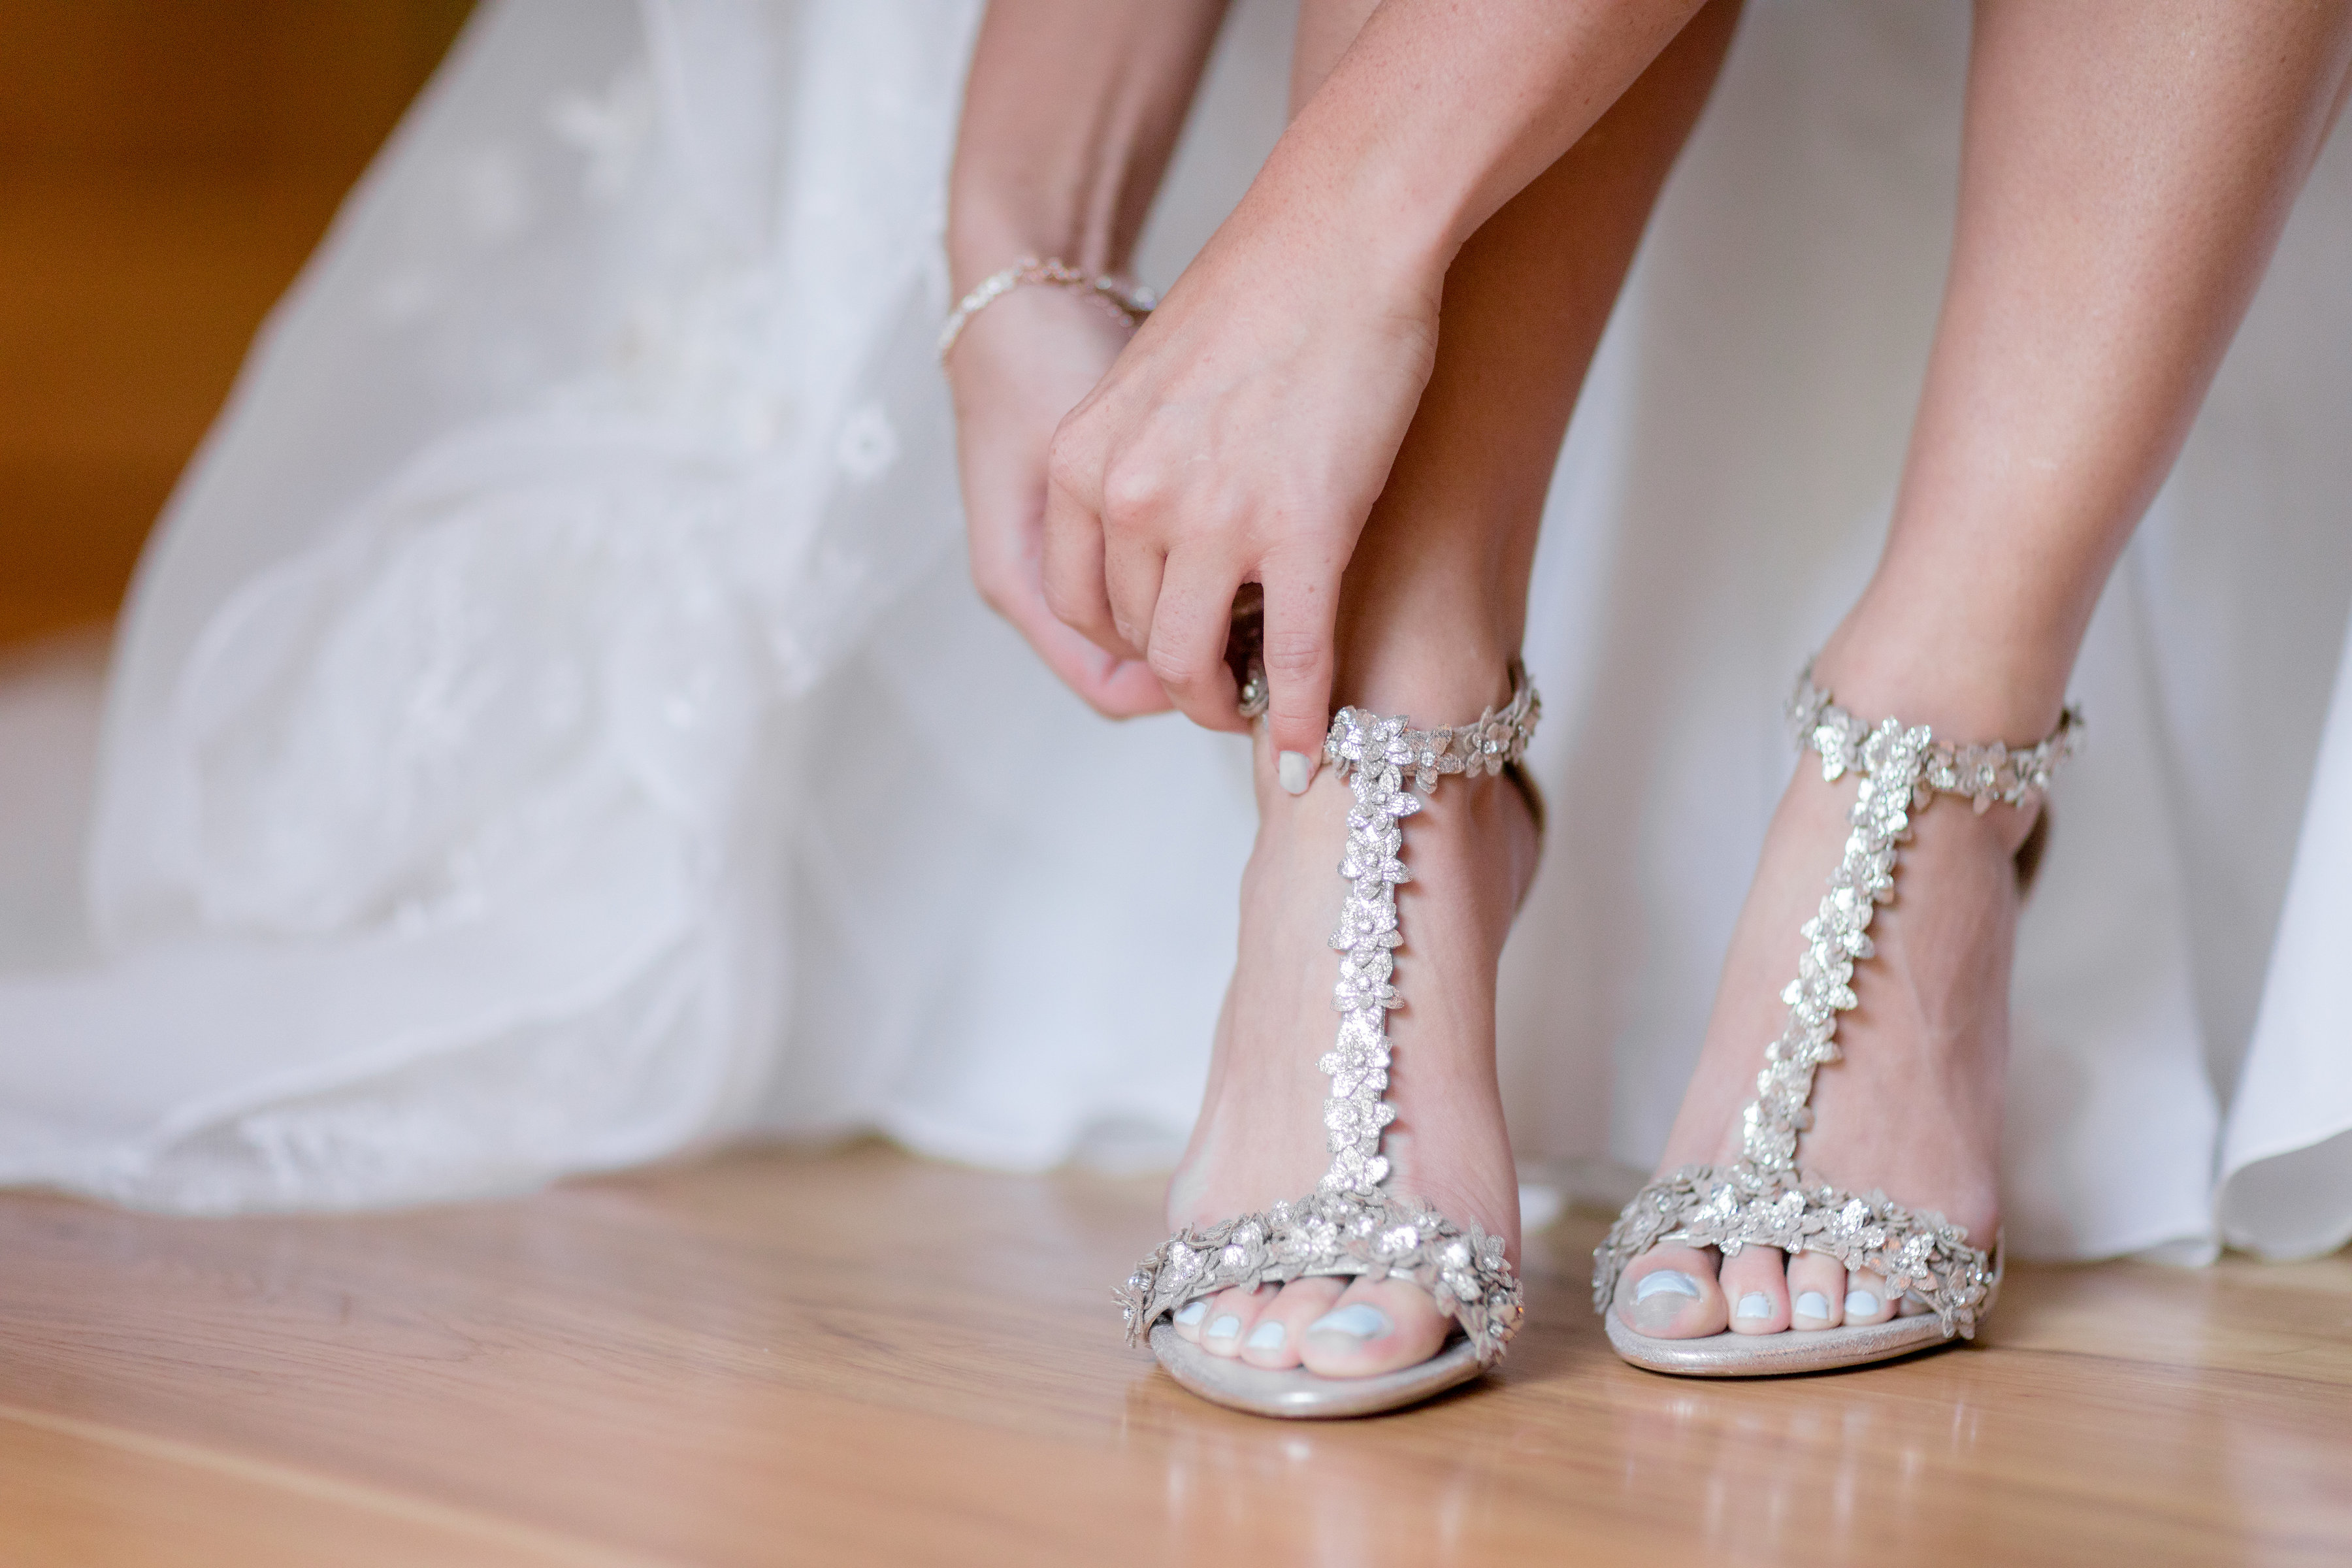 putting wedding shoes on 